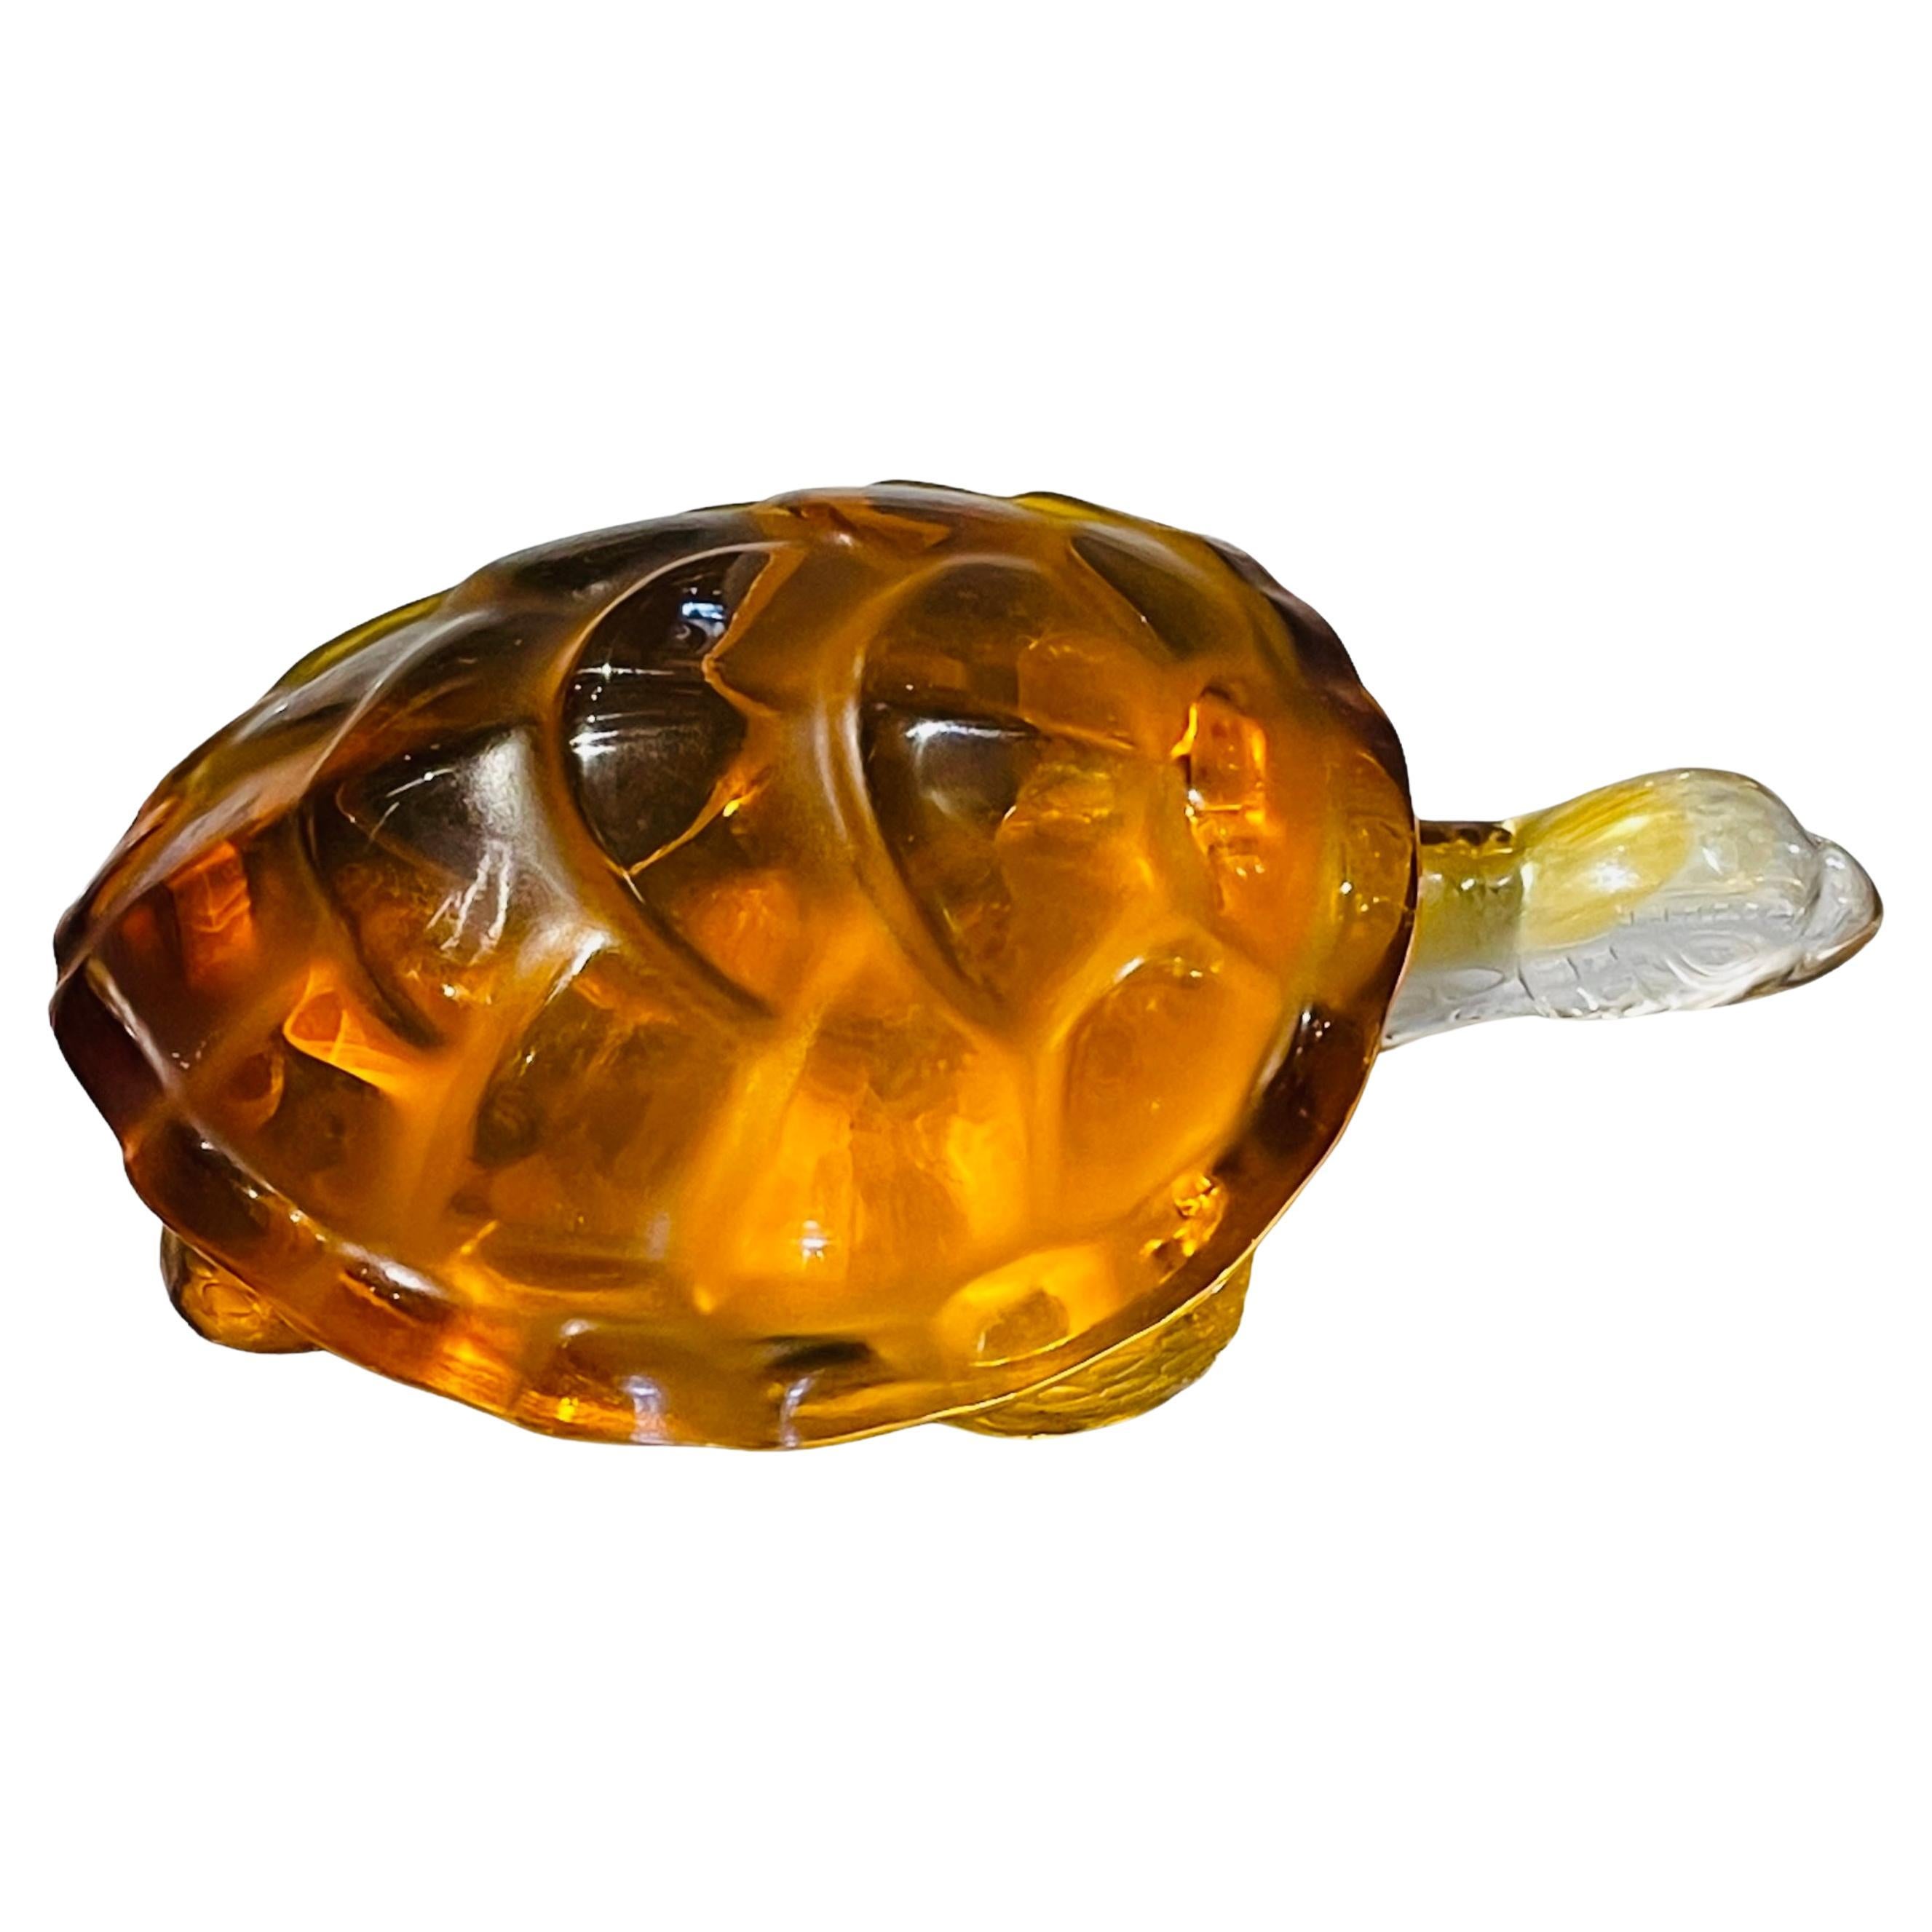 This is a Lalique Amber Crystal “Caroline”Turtle sculpture/paperweight. It depicts a turtle with an amber color crystal heart shaped carapace and clear crystal head, legs and neck. It is hallmarked Lalique encircled R, France.